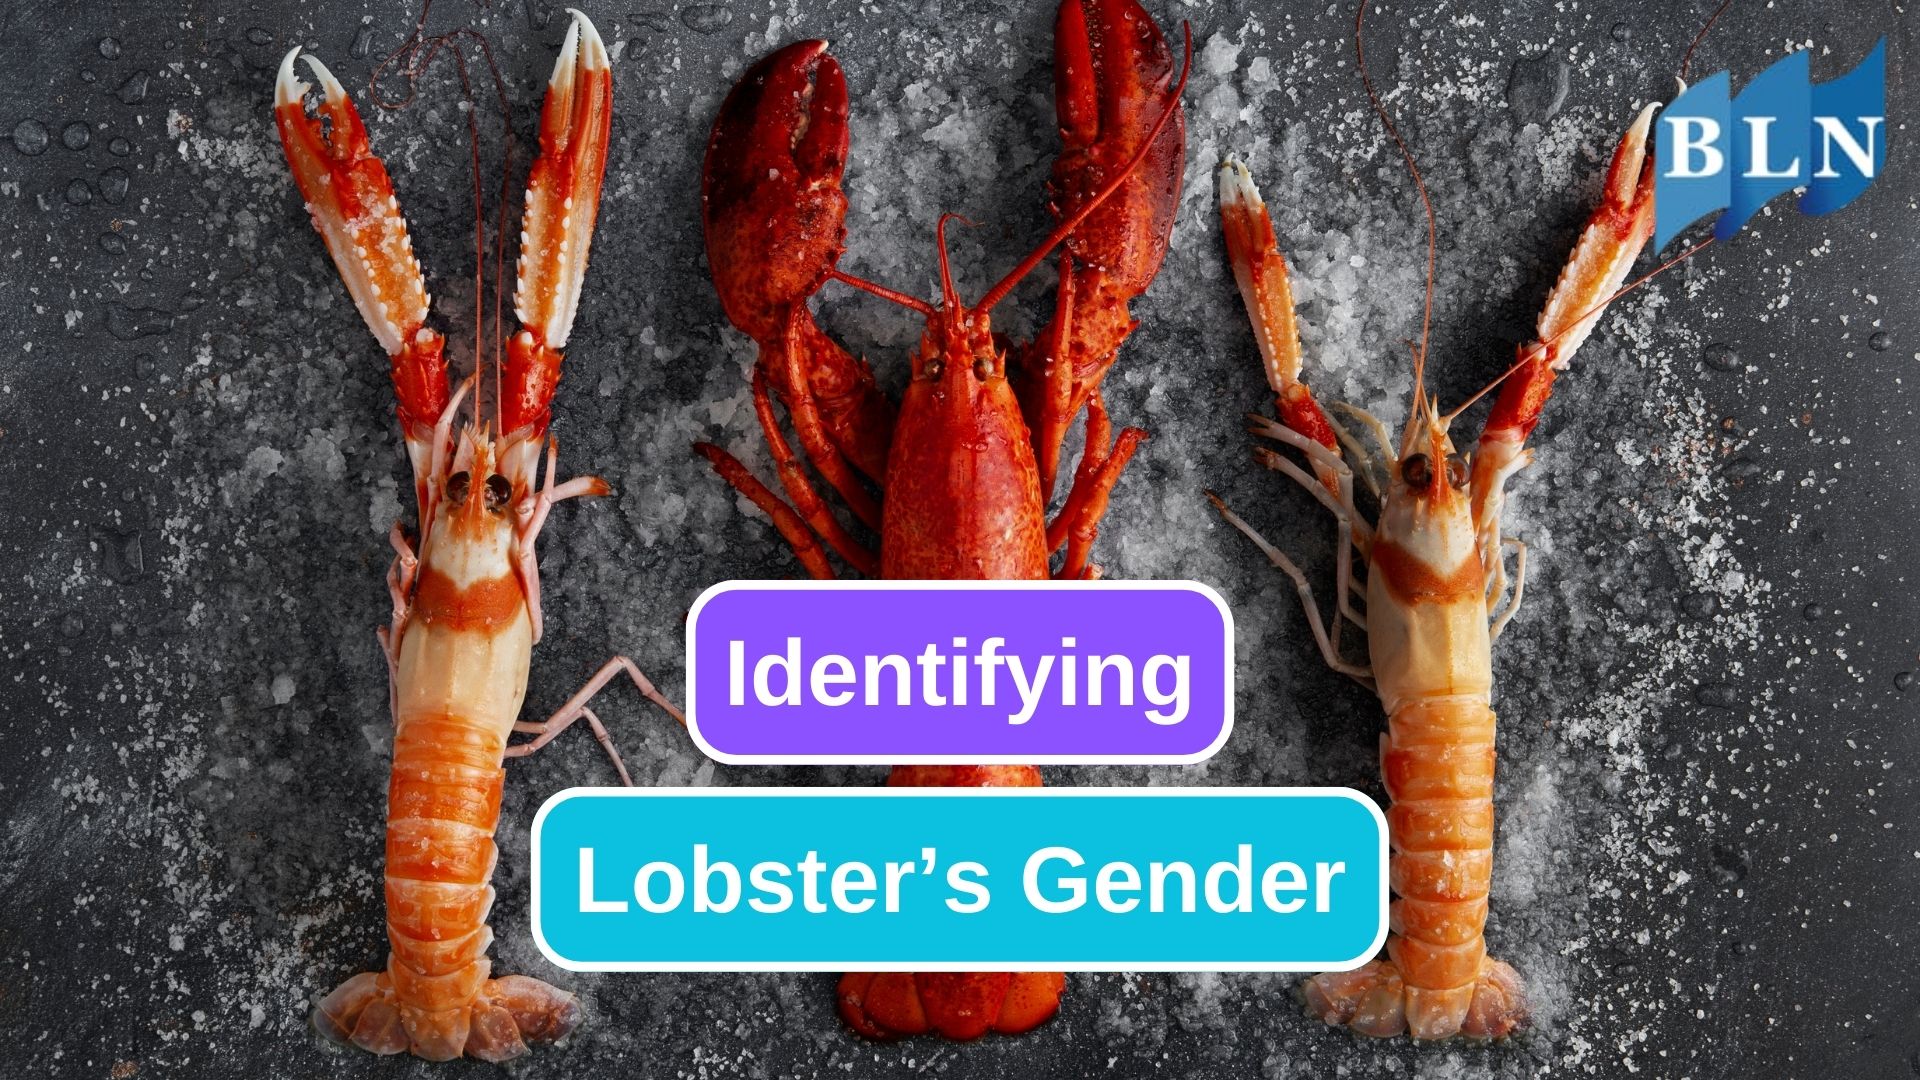 A Guide to Distinguishing Male and Female Lobster